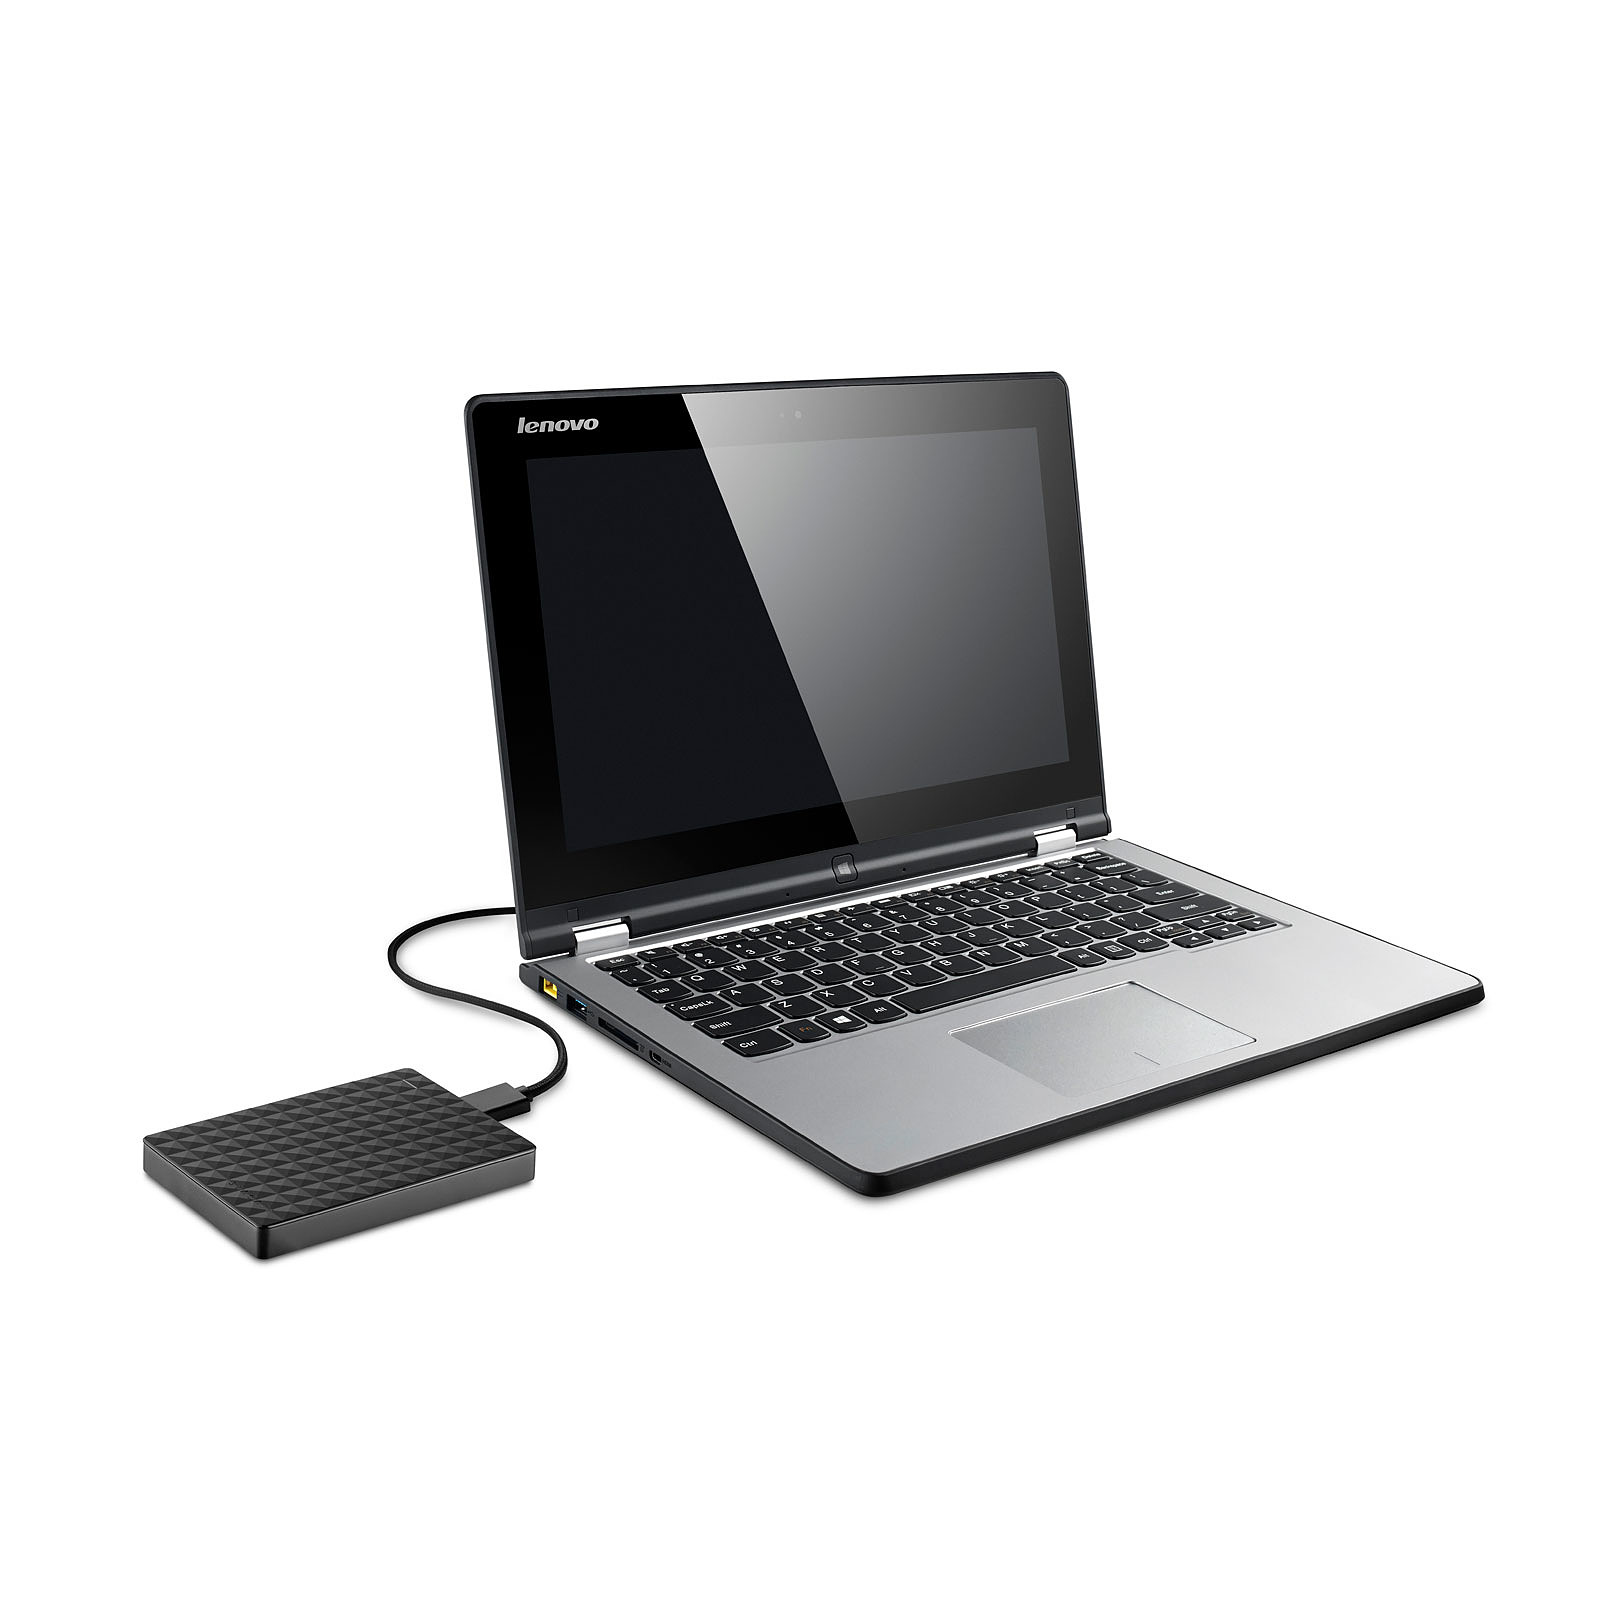 Disque dur externe Seagate 4To